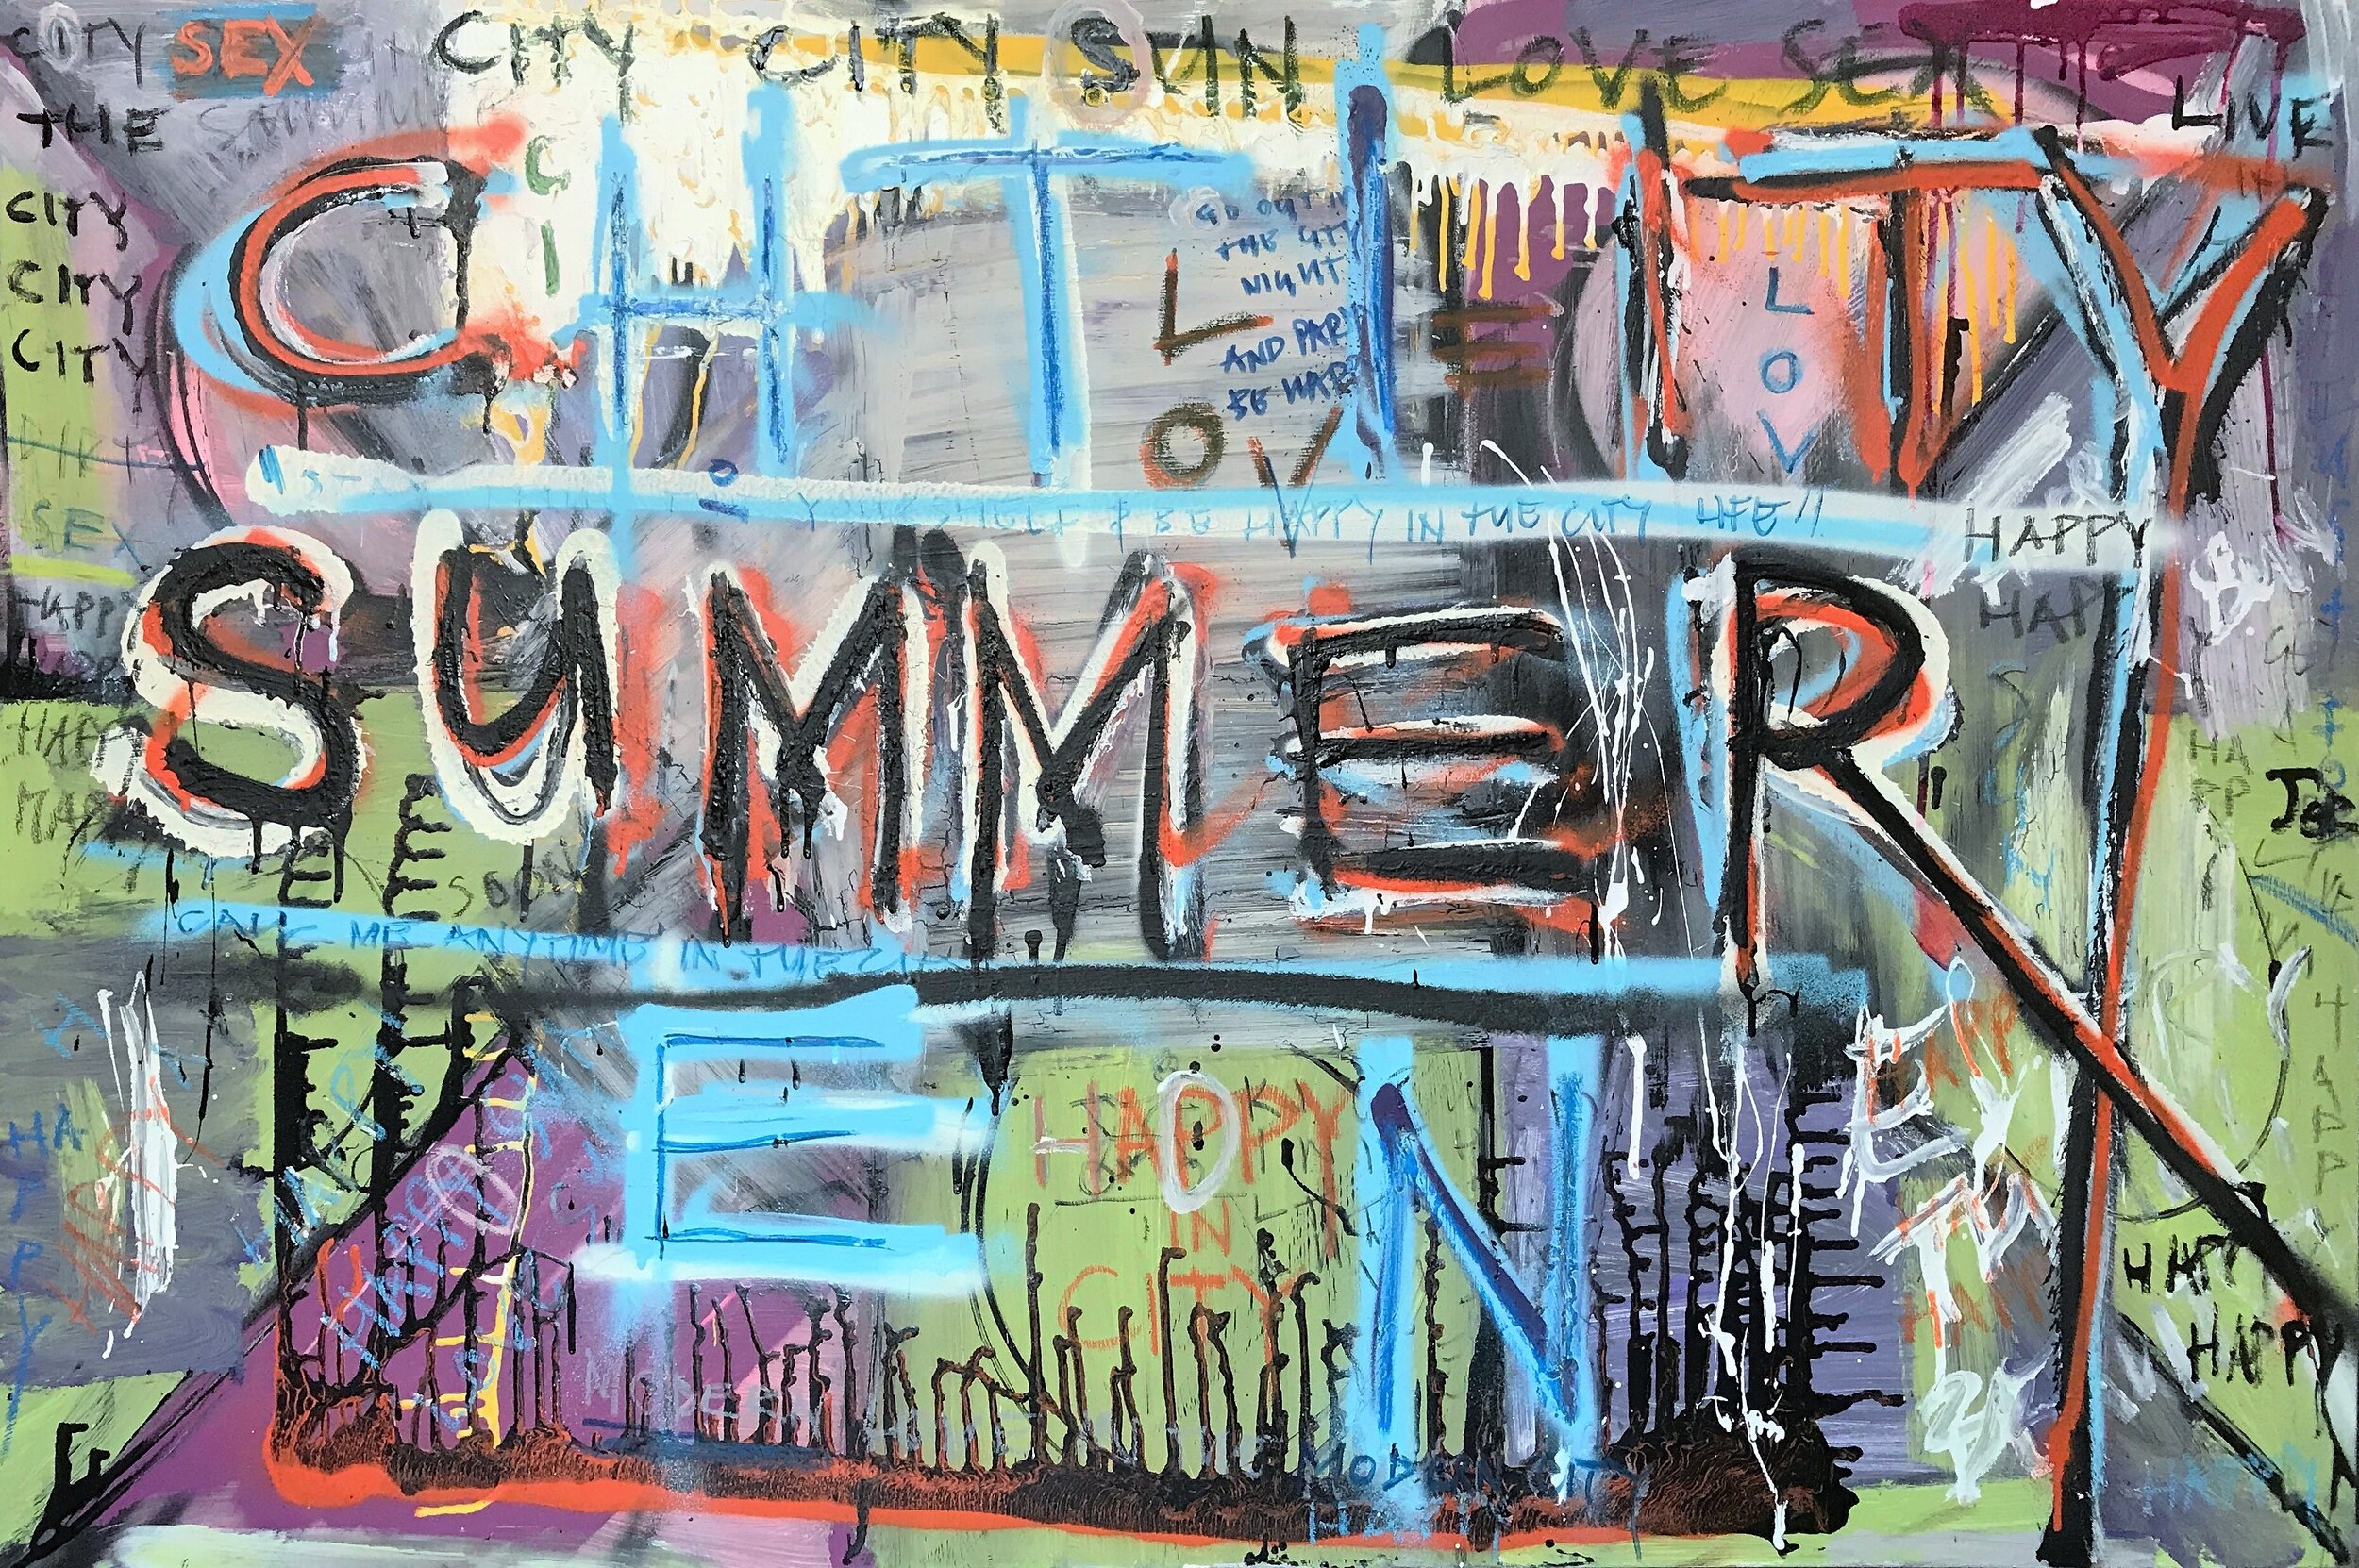 "Summer In The City" an artwork by Irish artist PIGSY aka Ciaran McCoy which sold as part of his "Nostalgia" art exhibition in Fumbally Exchange, now part of a private art collection in Dublin  (Copy)